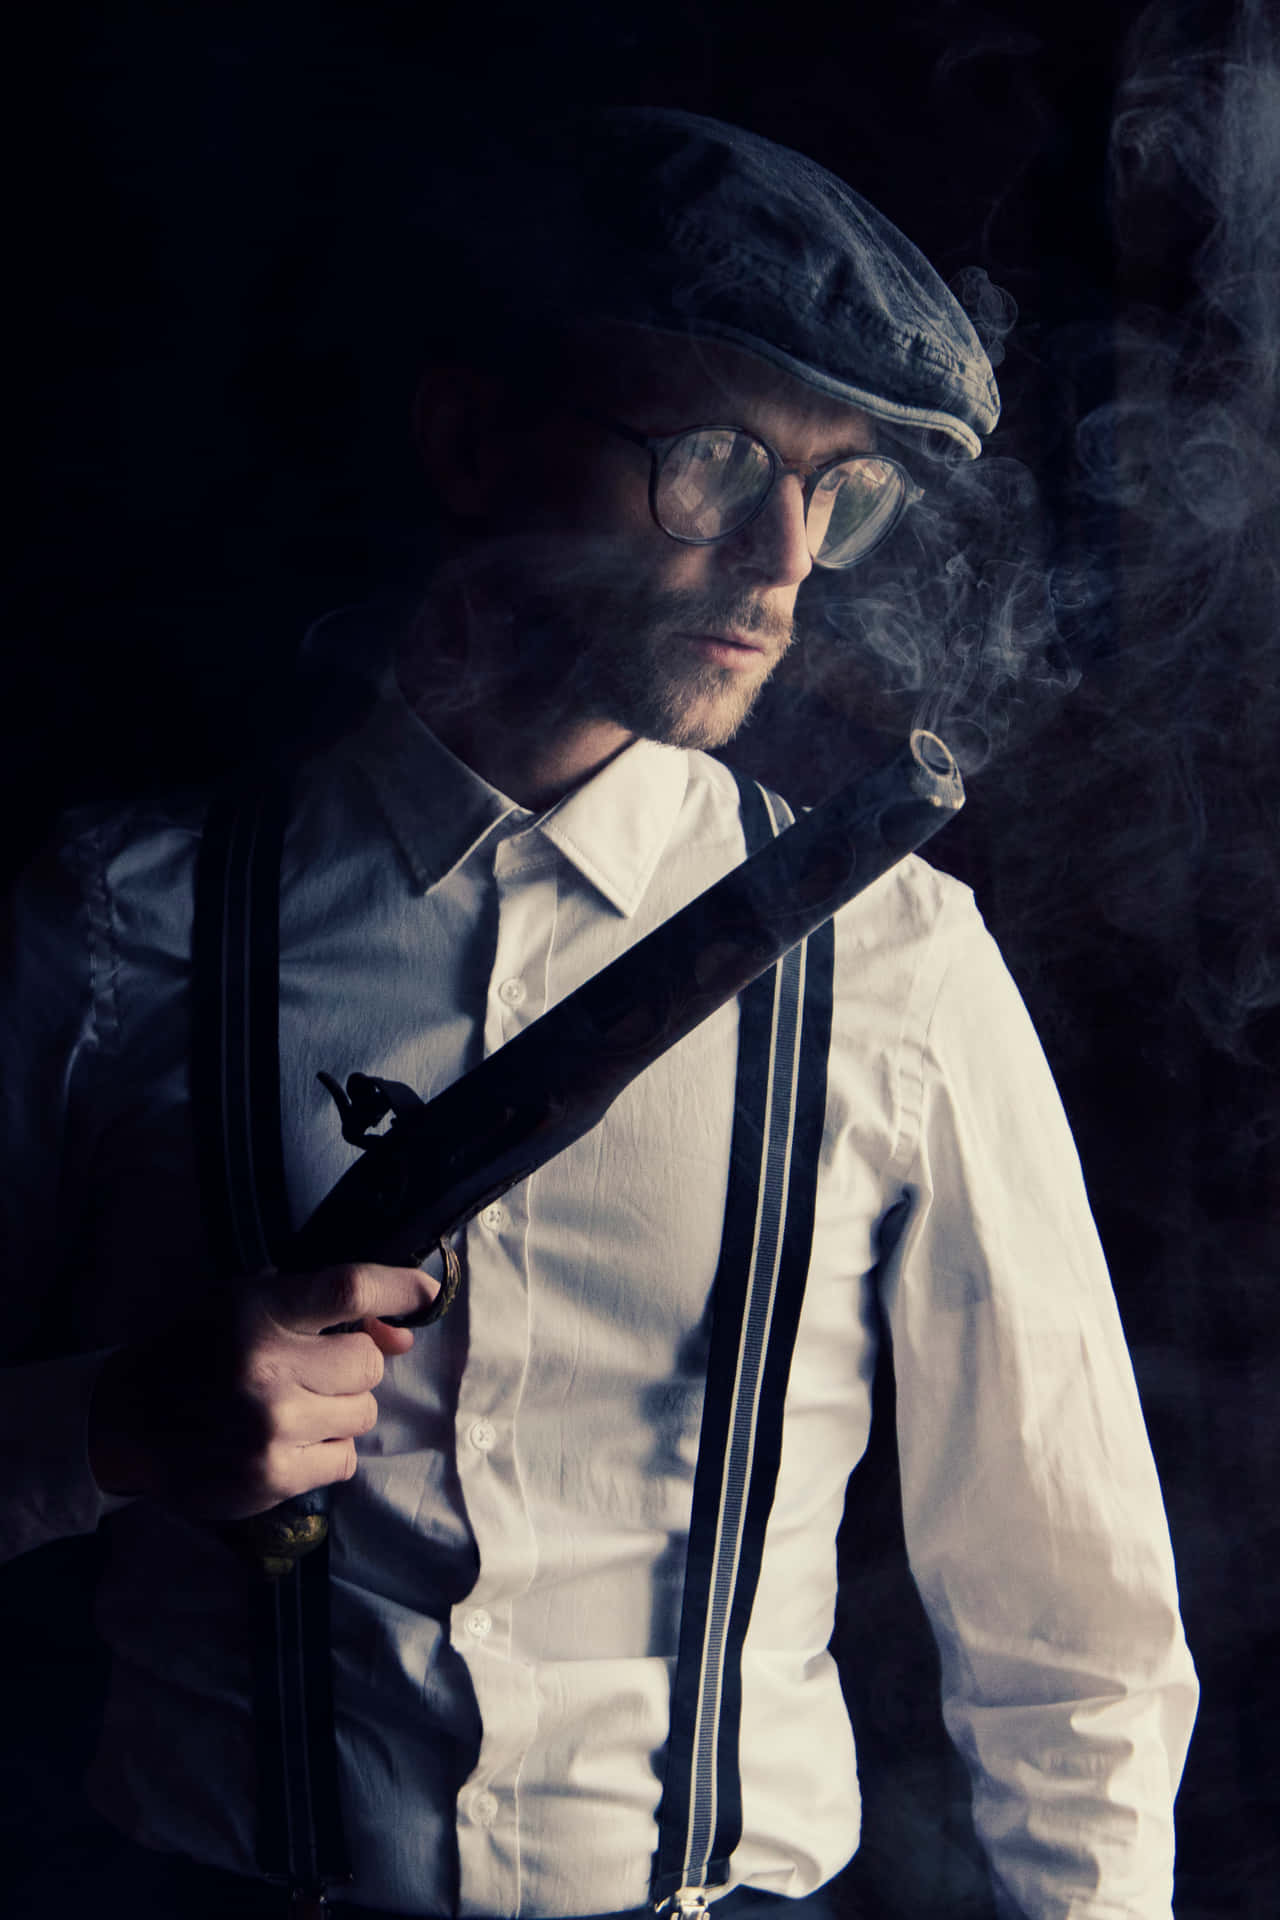 Gangsters With Guns In Suspenders Wallpaper